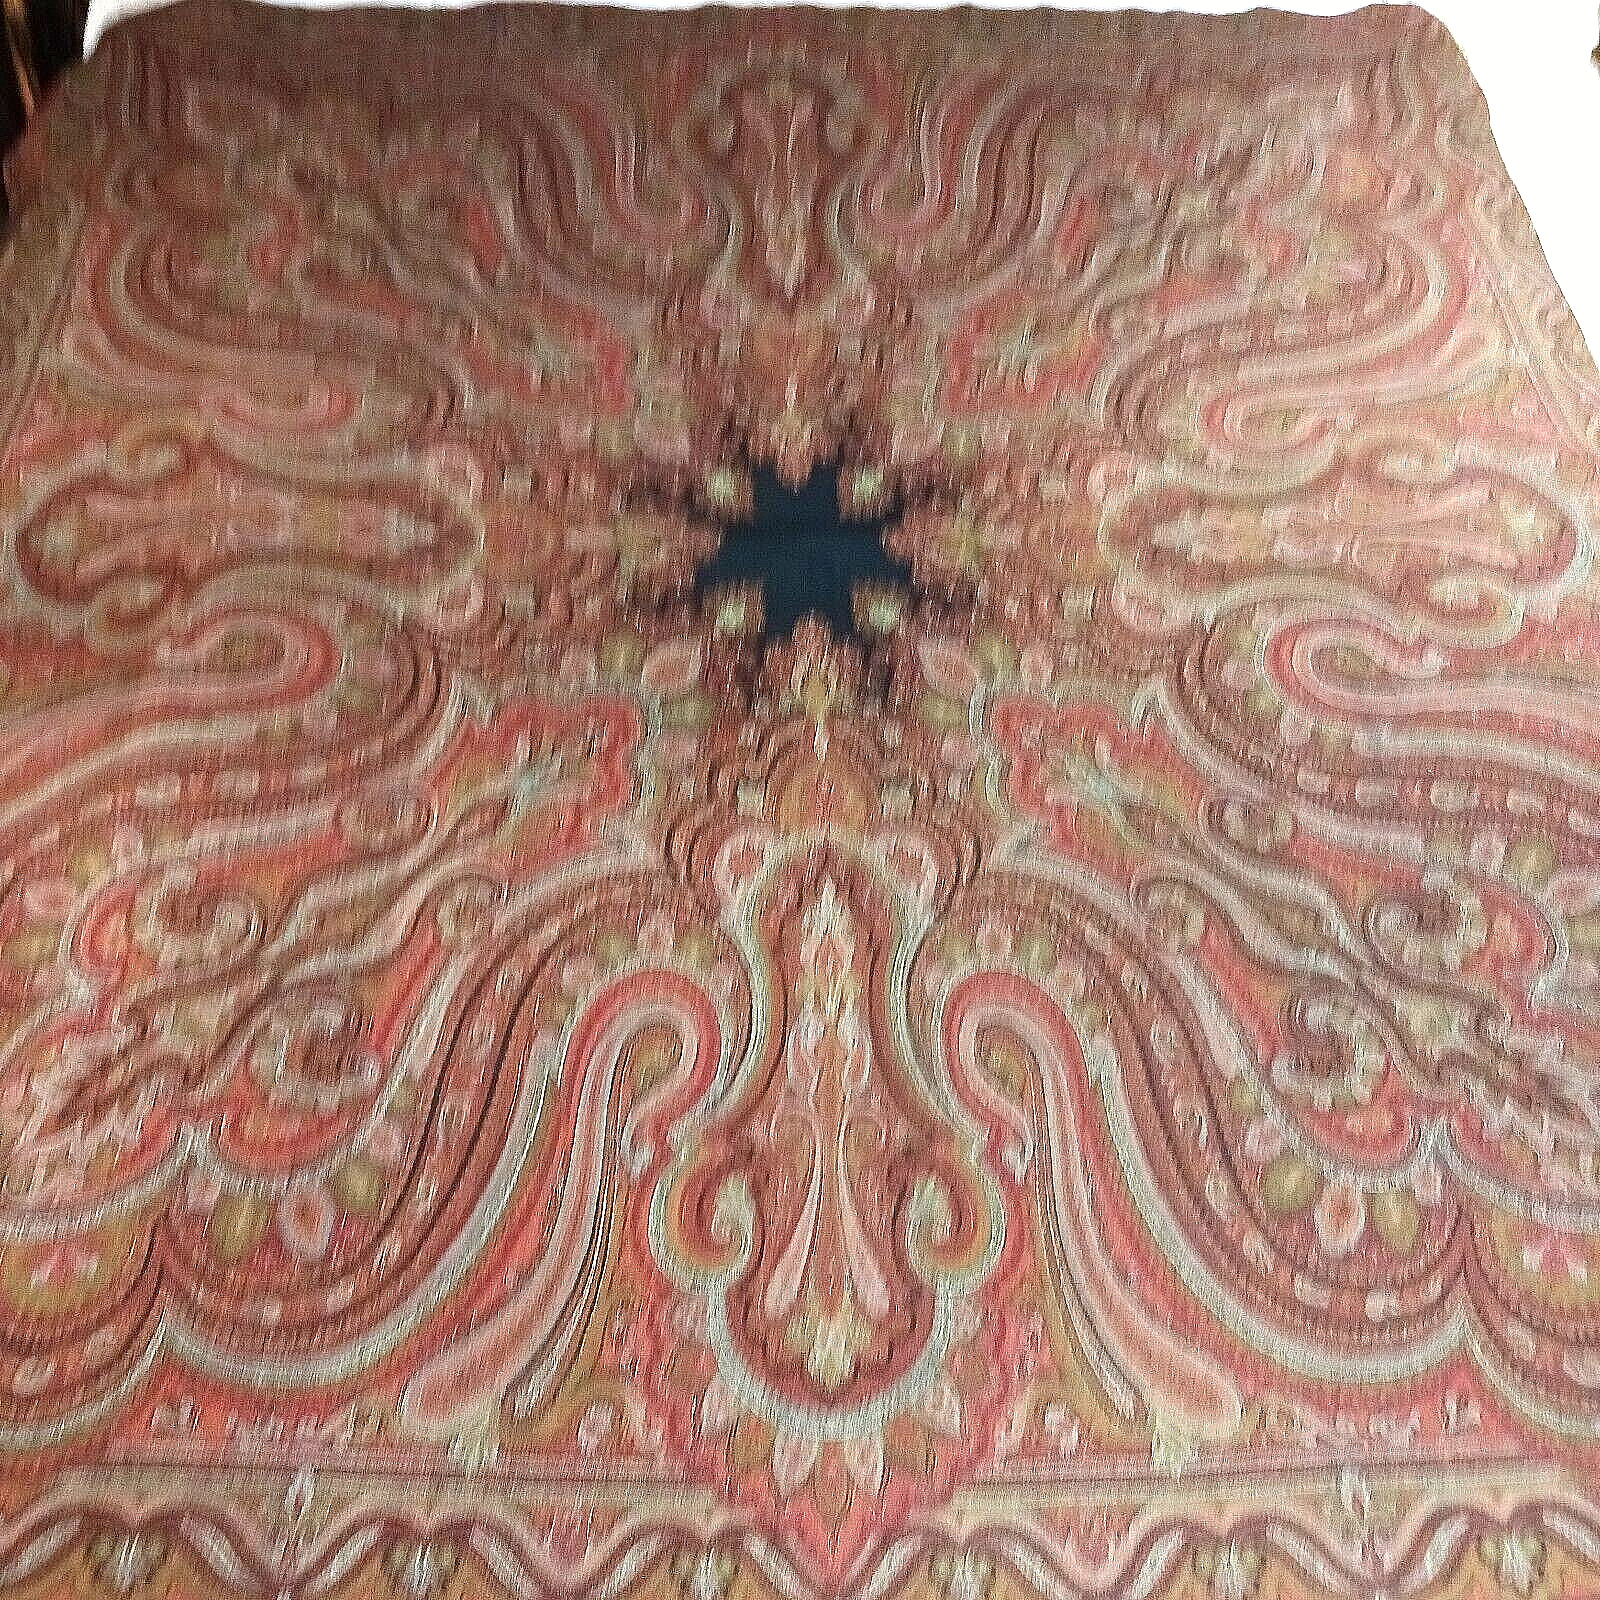 Antique Victorian Kashmir Paisley Piano Scarf Shawl Tablecloth Wool Textile